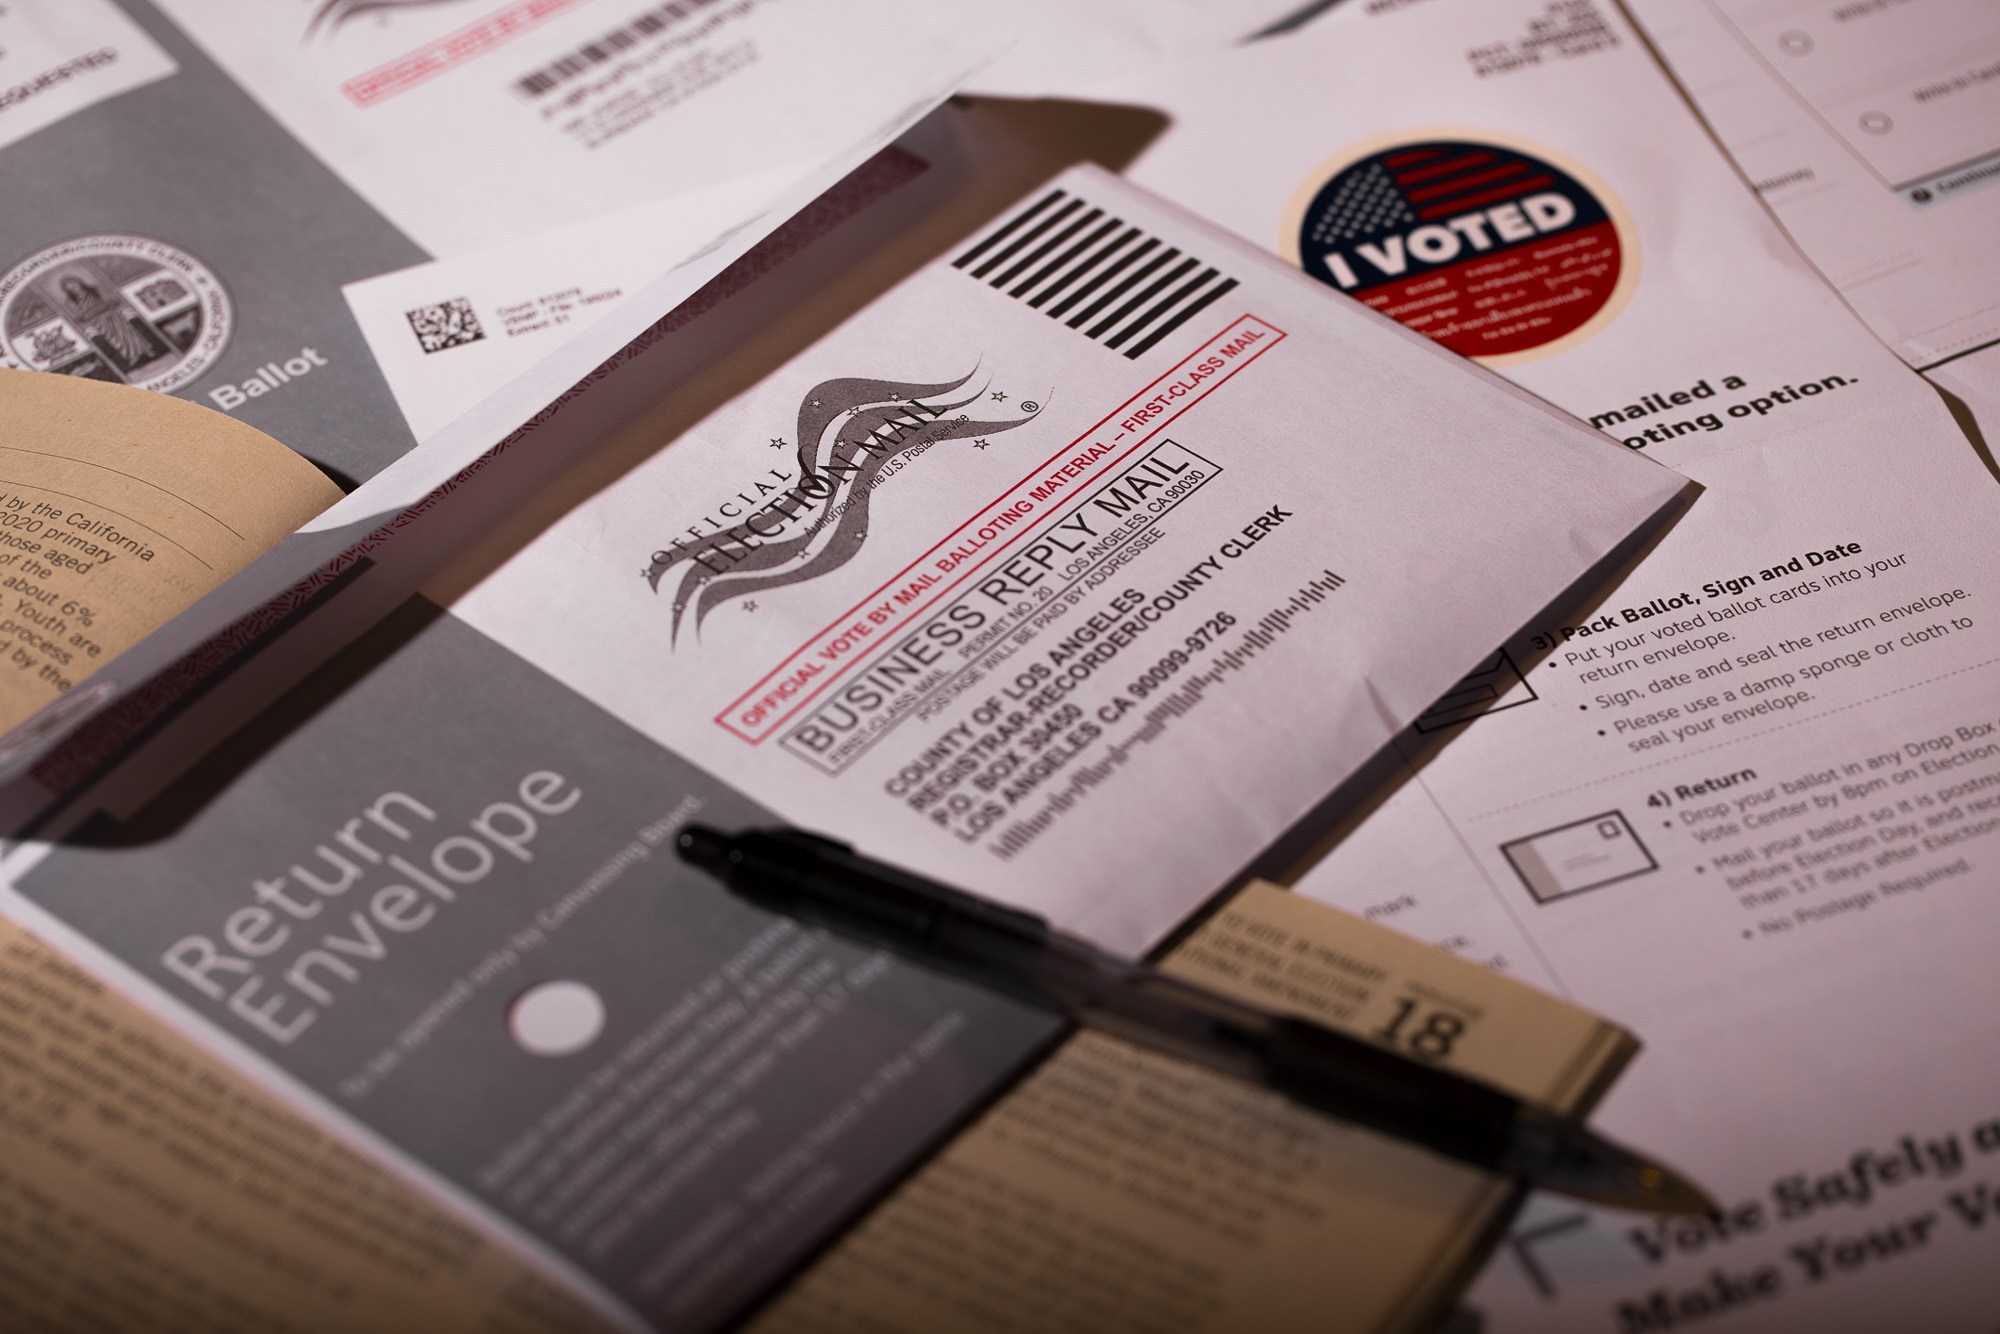 A close-up of various voting materials spread out, including a 